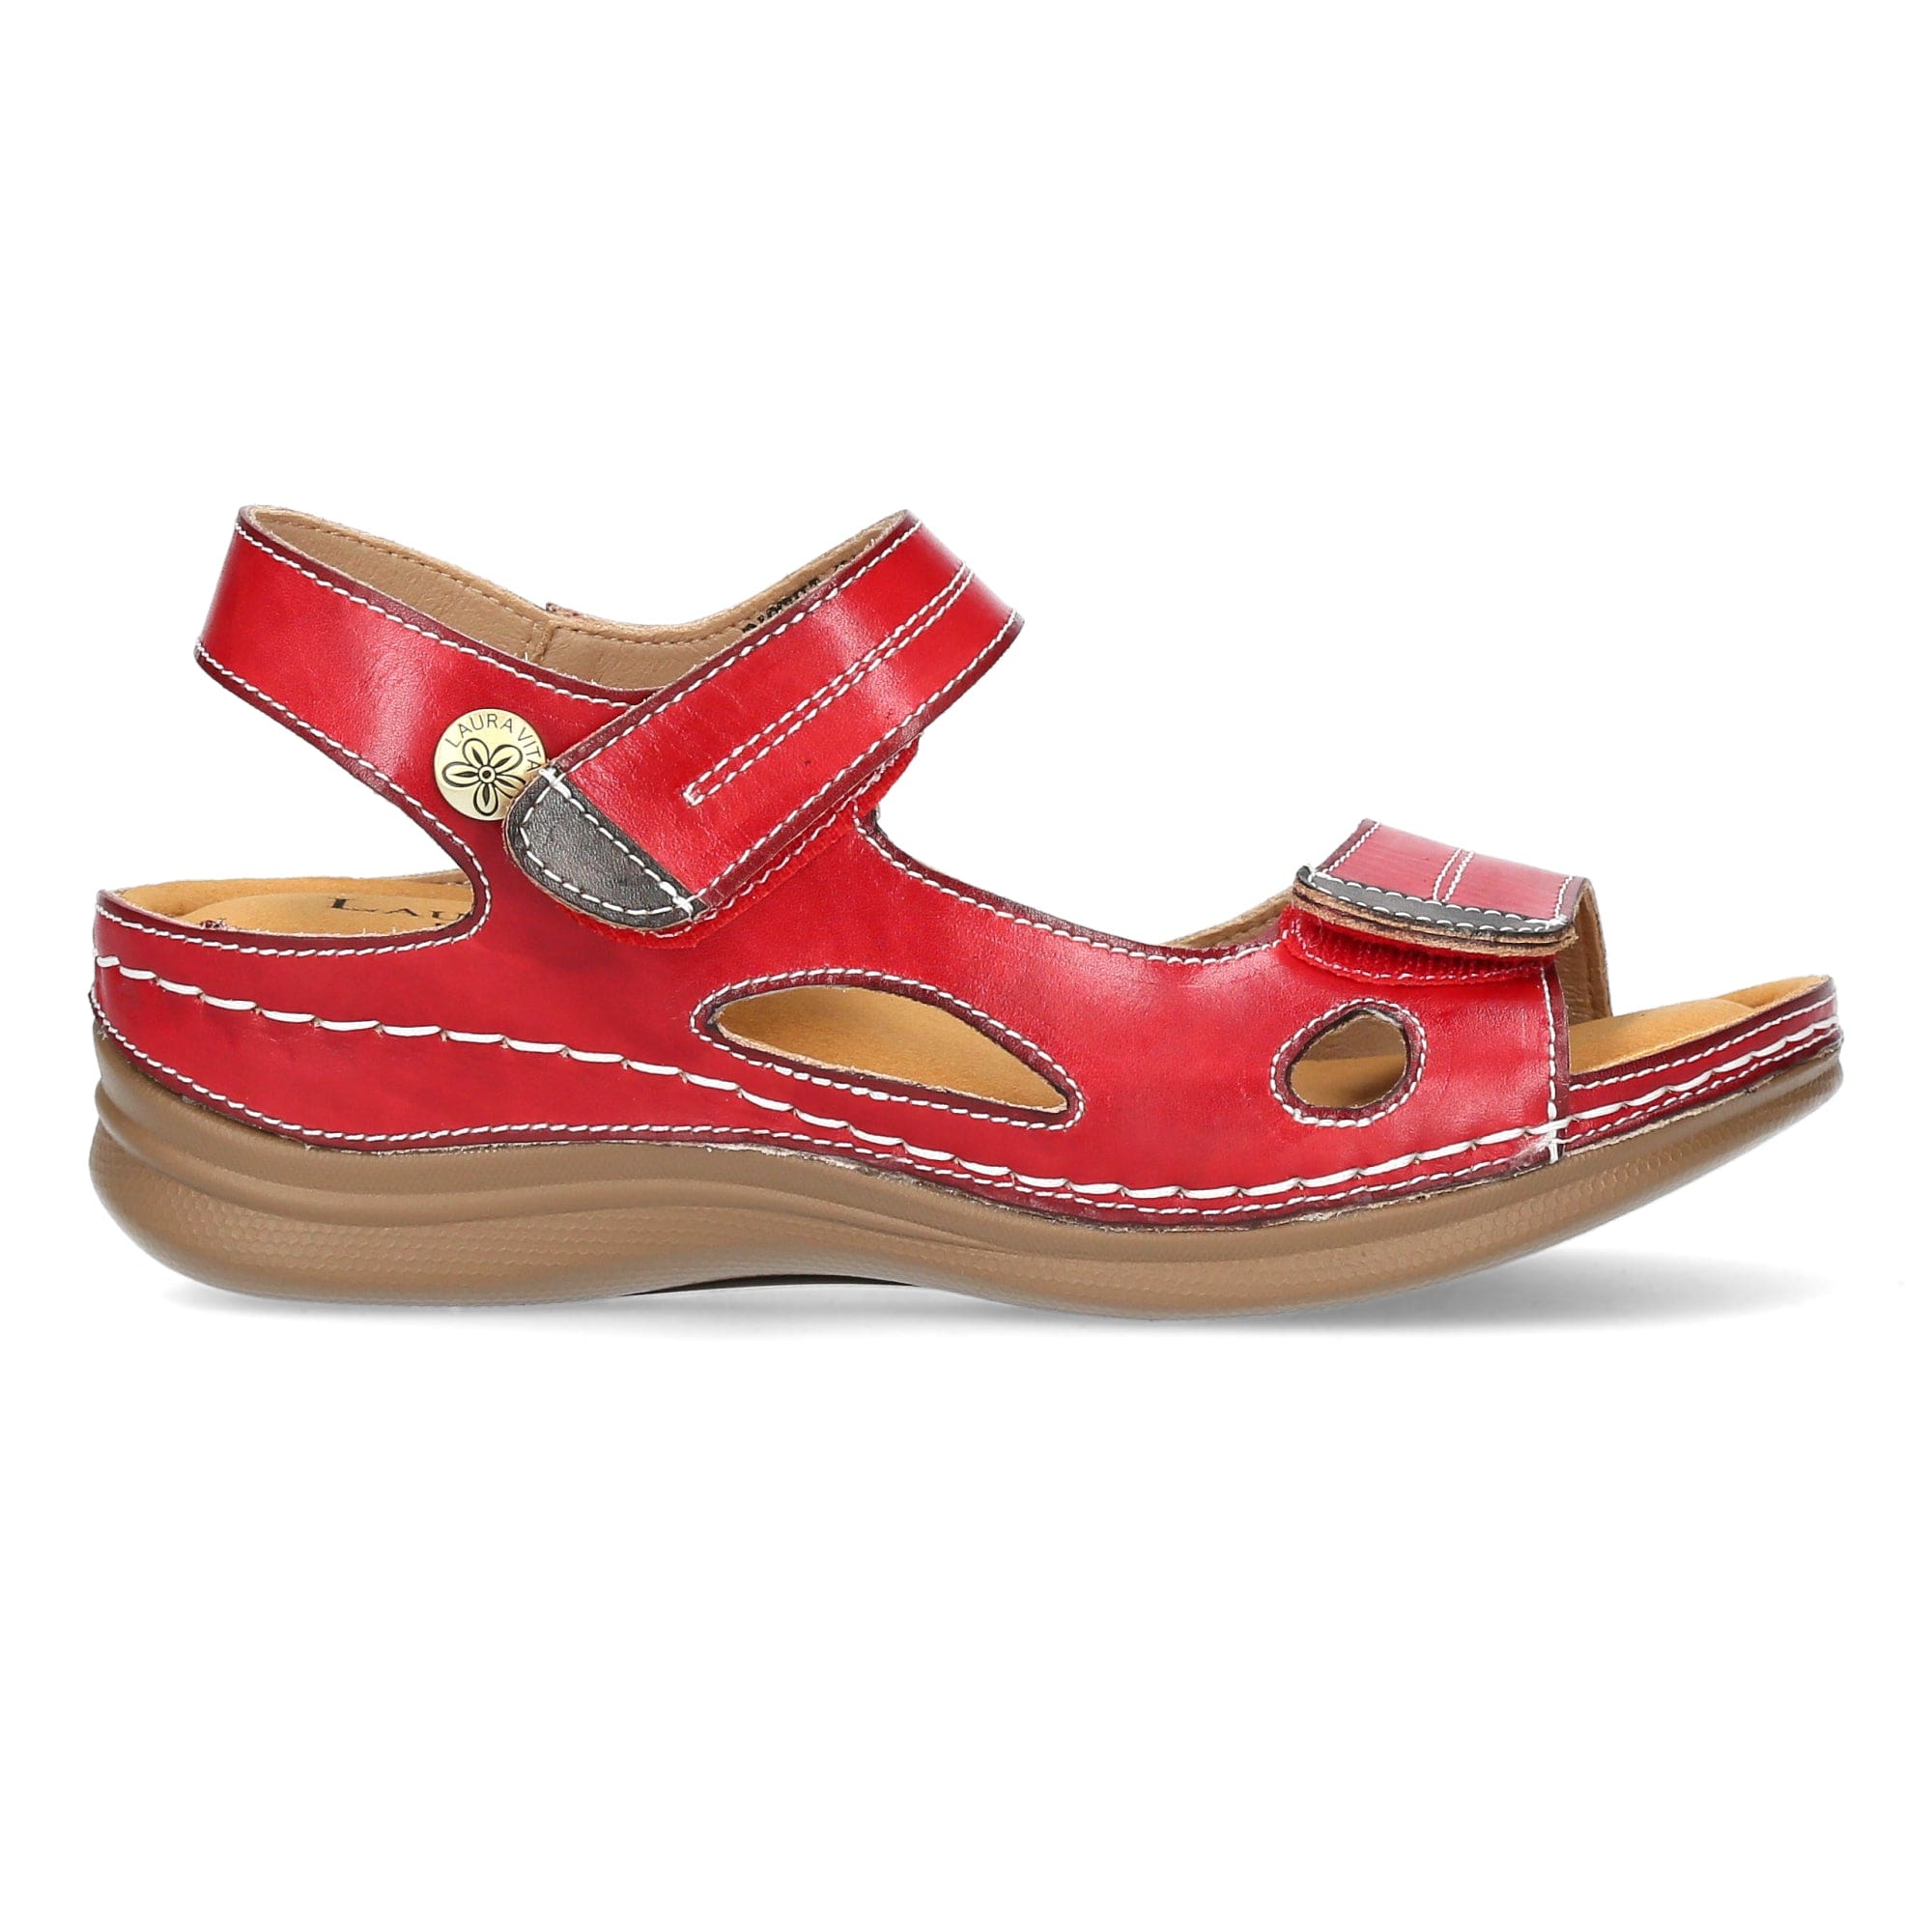 Schuh BISCUIT 124 - 35 / Rot - Sandale